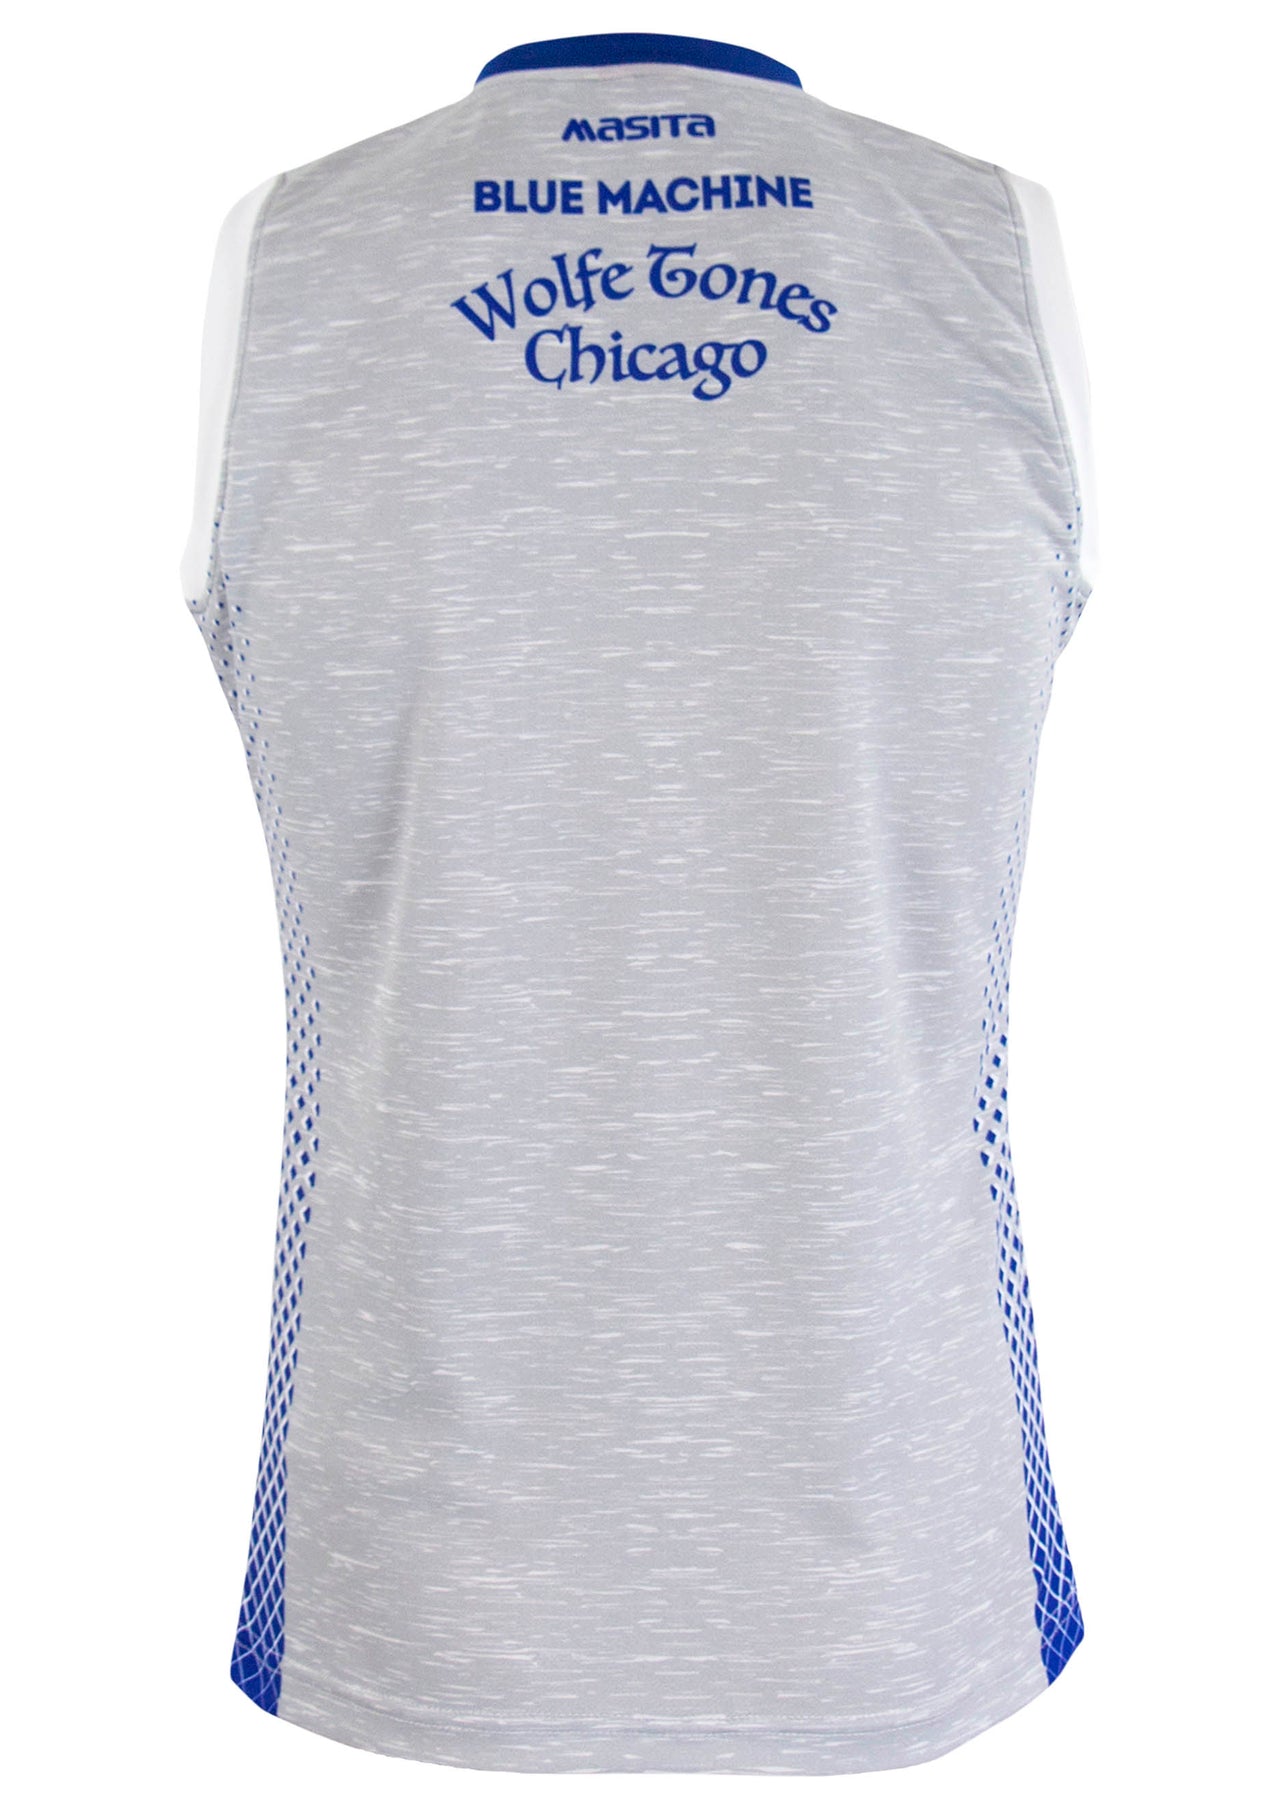 Chicago Wolfe Tones Home Sleeveless Shirt Player Fit Adult